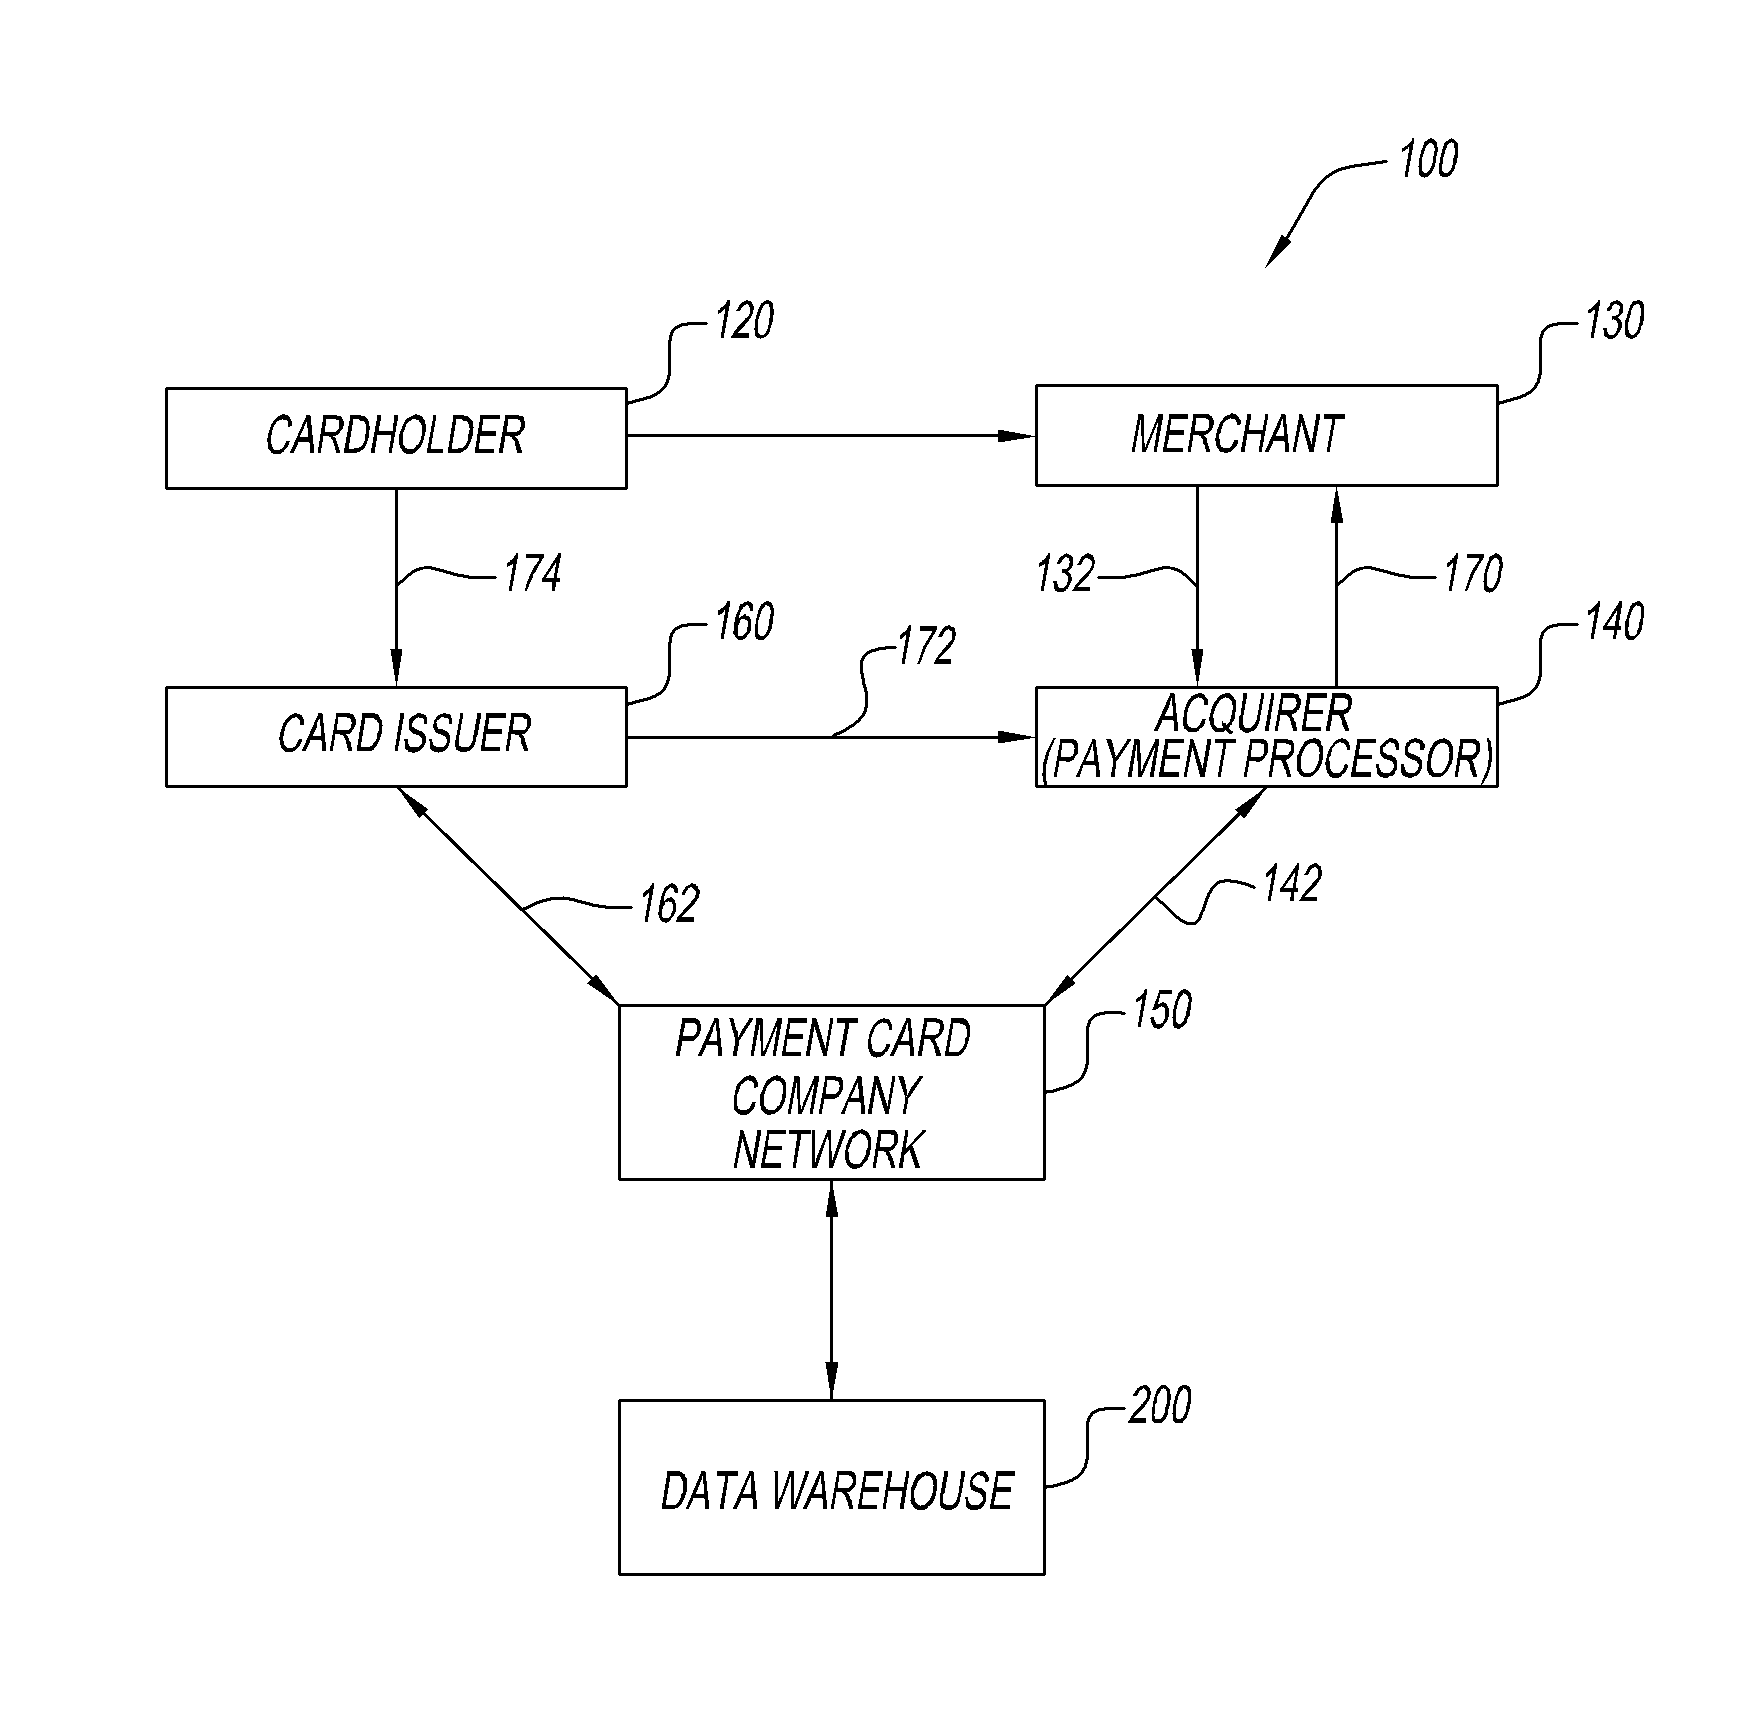 Method and system for authentication of payment card transactions